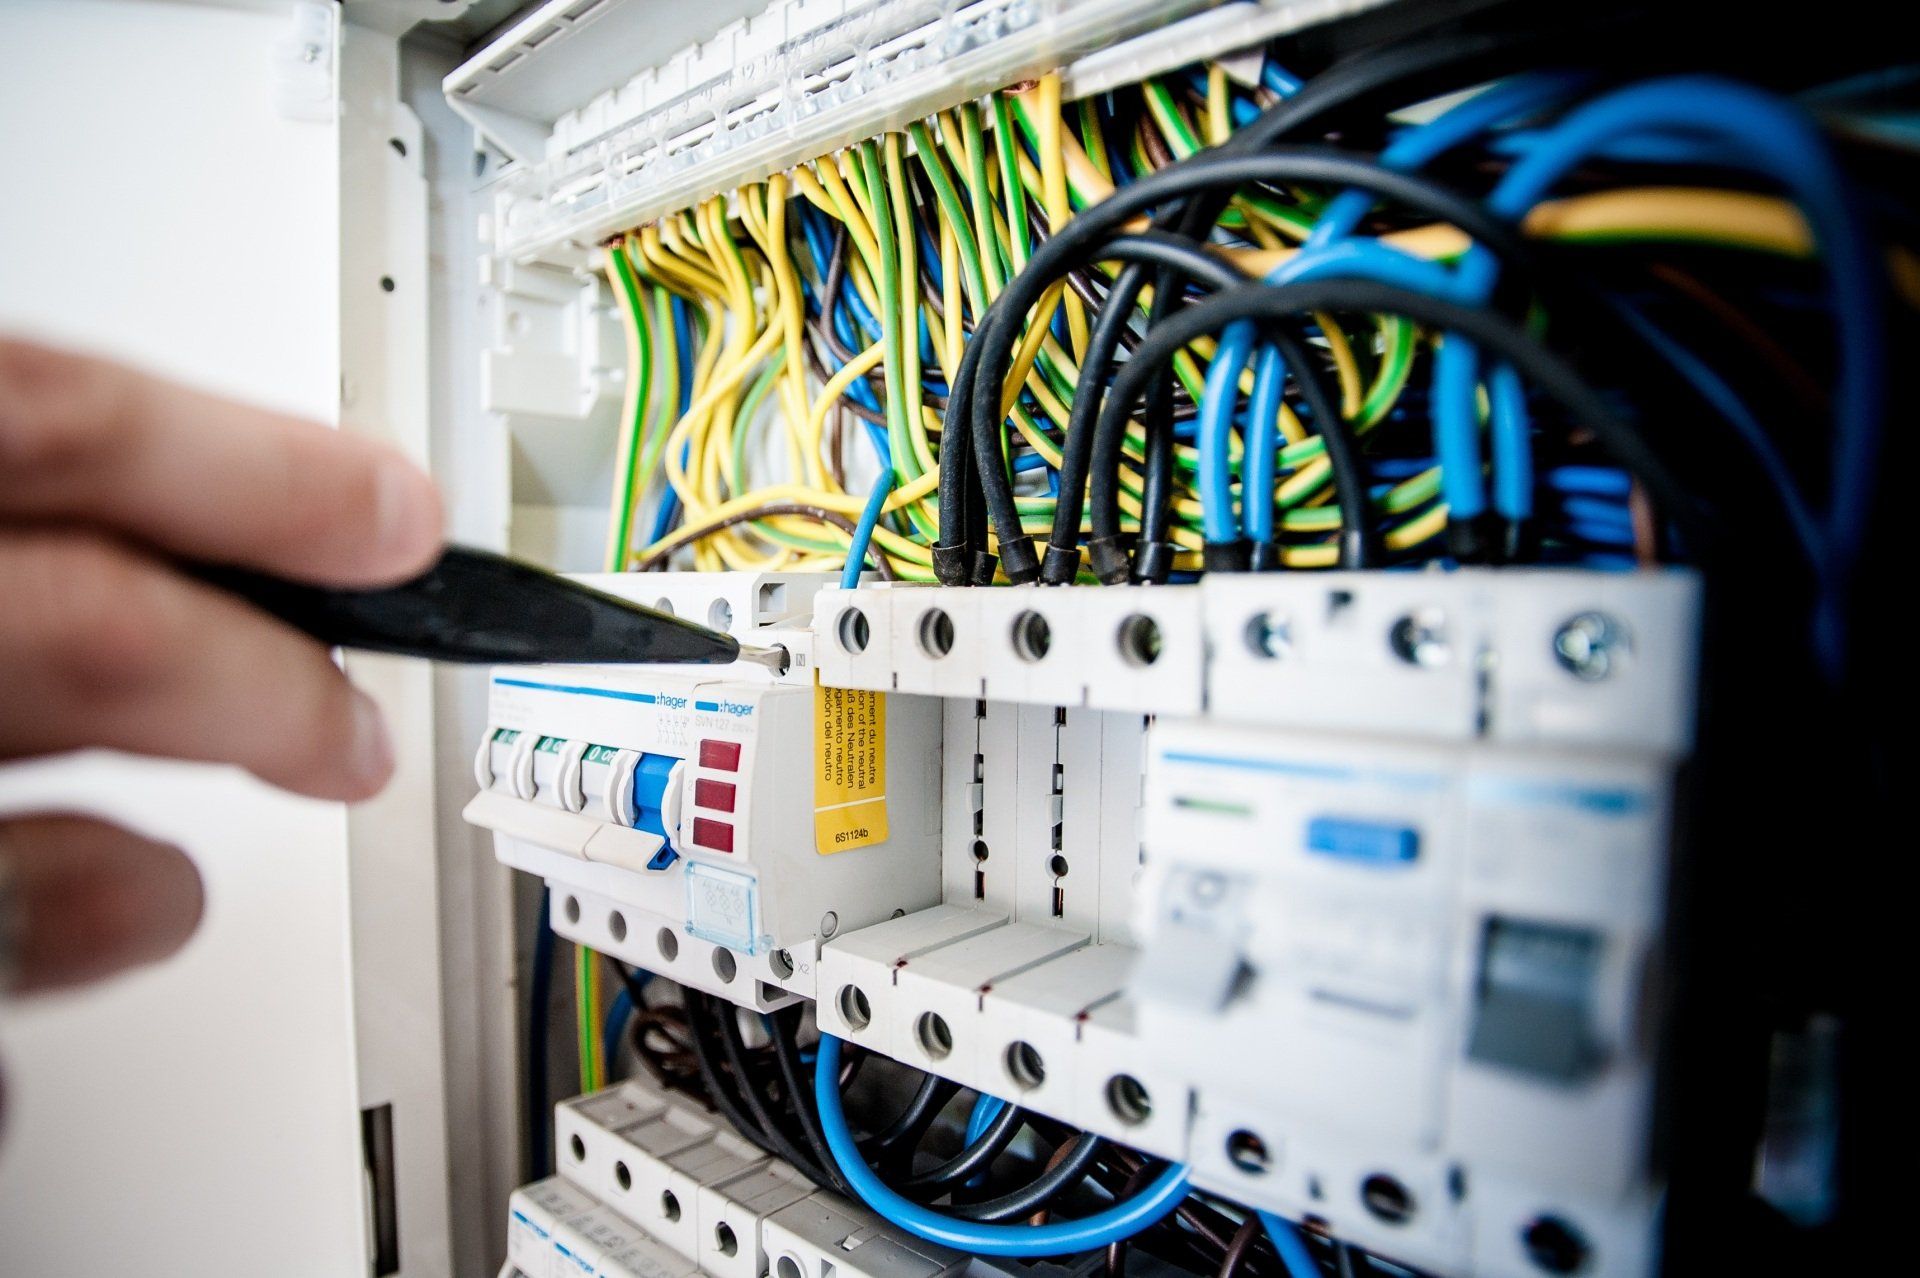 An electrician performing a test on an electrical panel, checking its protective shield and connections.